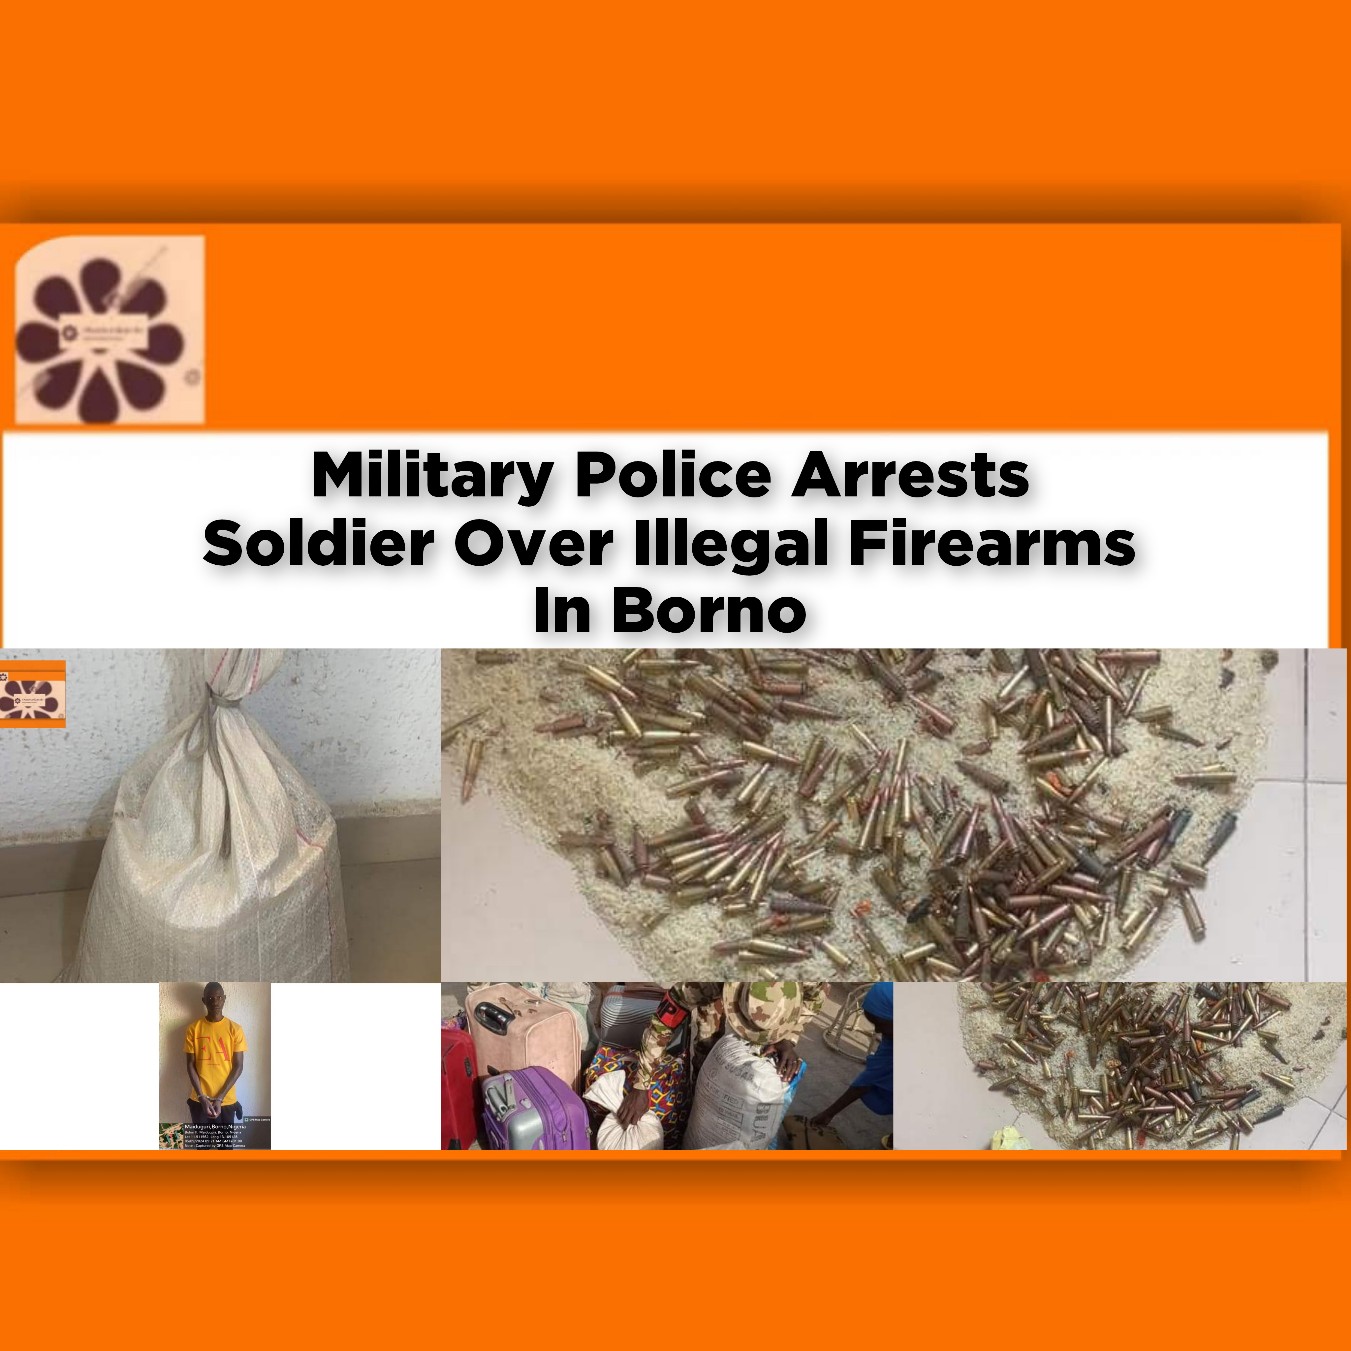 Military Police Arrests Soldier Over Illegal Firearms In Borno ~ OsazuwaAkonedo #North